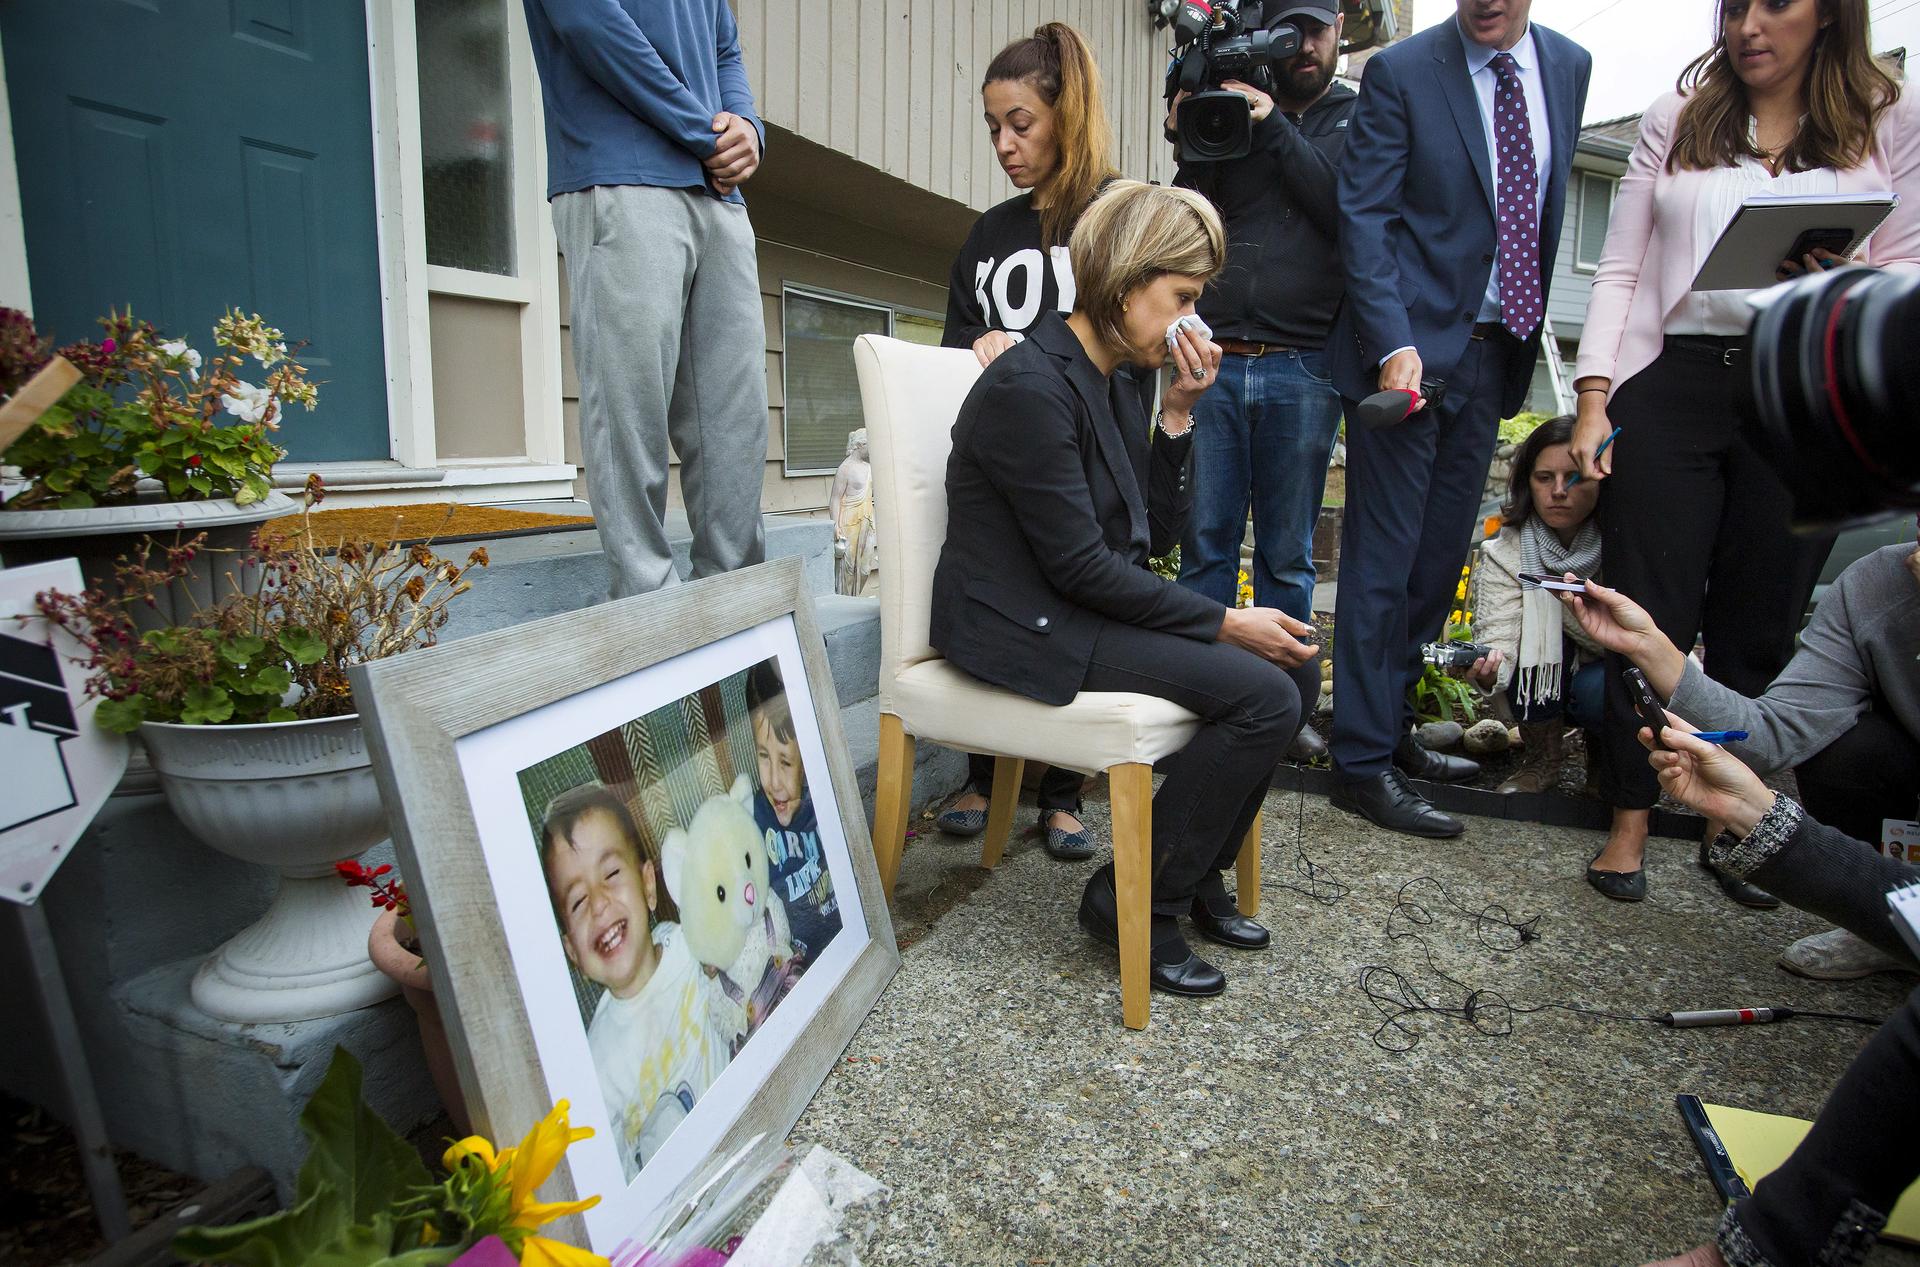 Tima Kurdi, sister of Syrian refugee Abdullah Kurdi whose sons Aylan and Galip and wife Rehan were among 12 people who drowned in Turkey trying to reach Greece, cries while speaking to the media outside her home in Coquitlam, British Columbia. A photograp